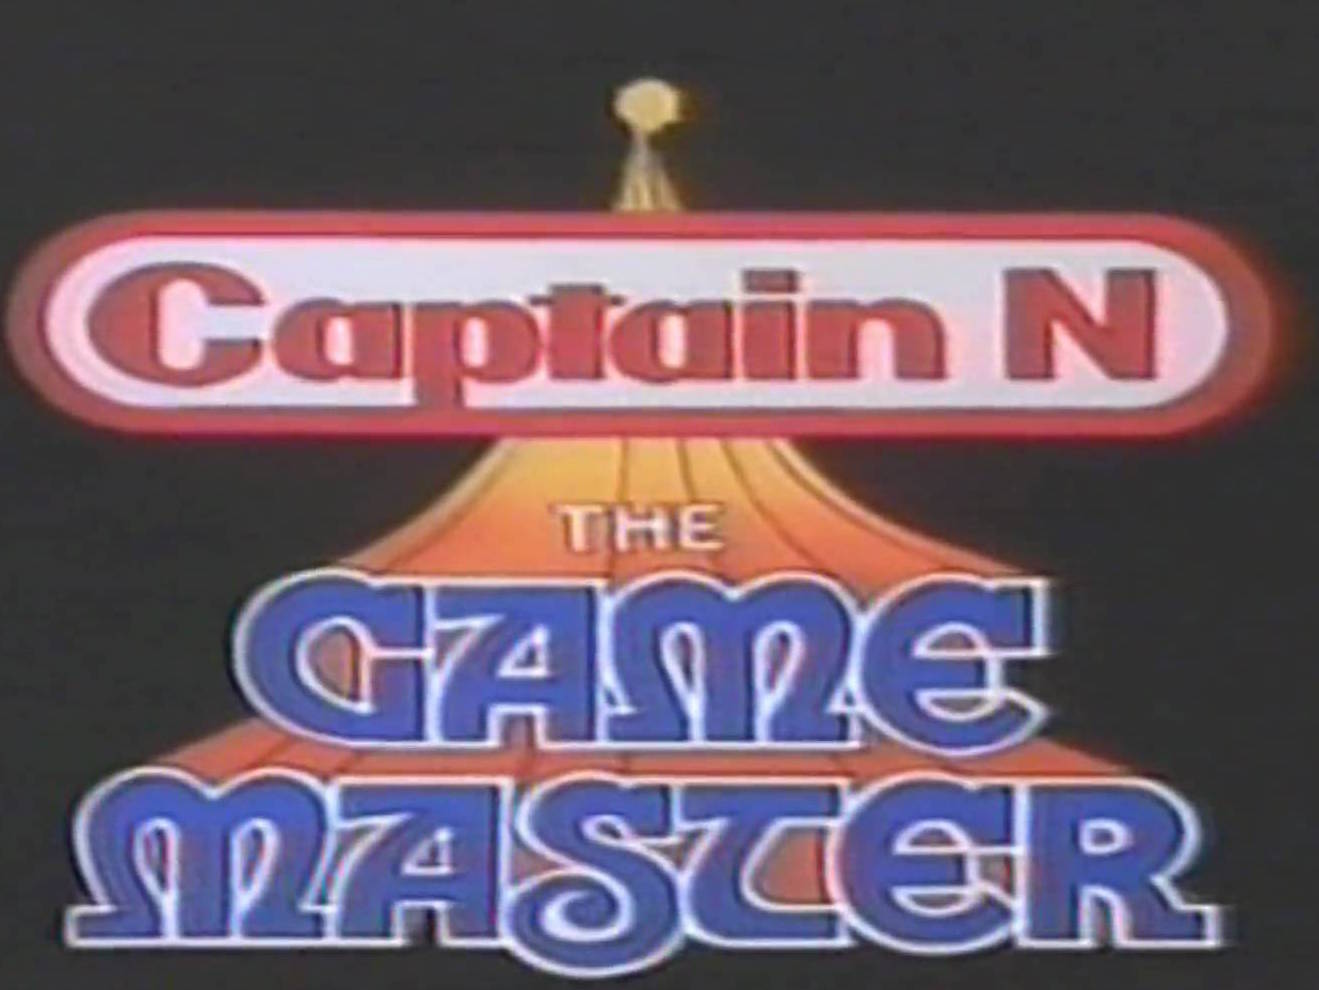 Captain N: The Game Master, Captain N Wiki